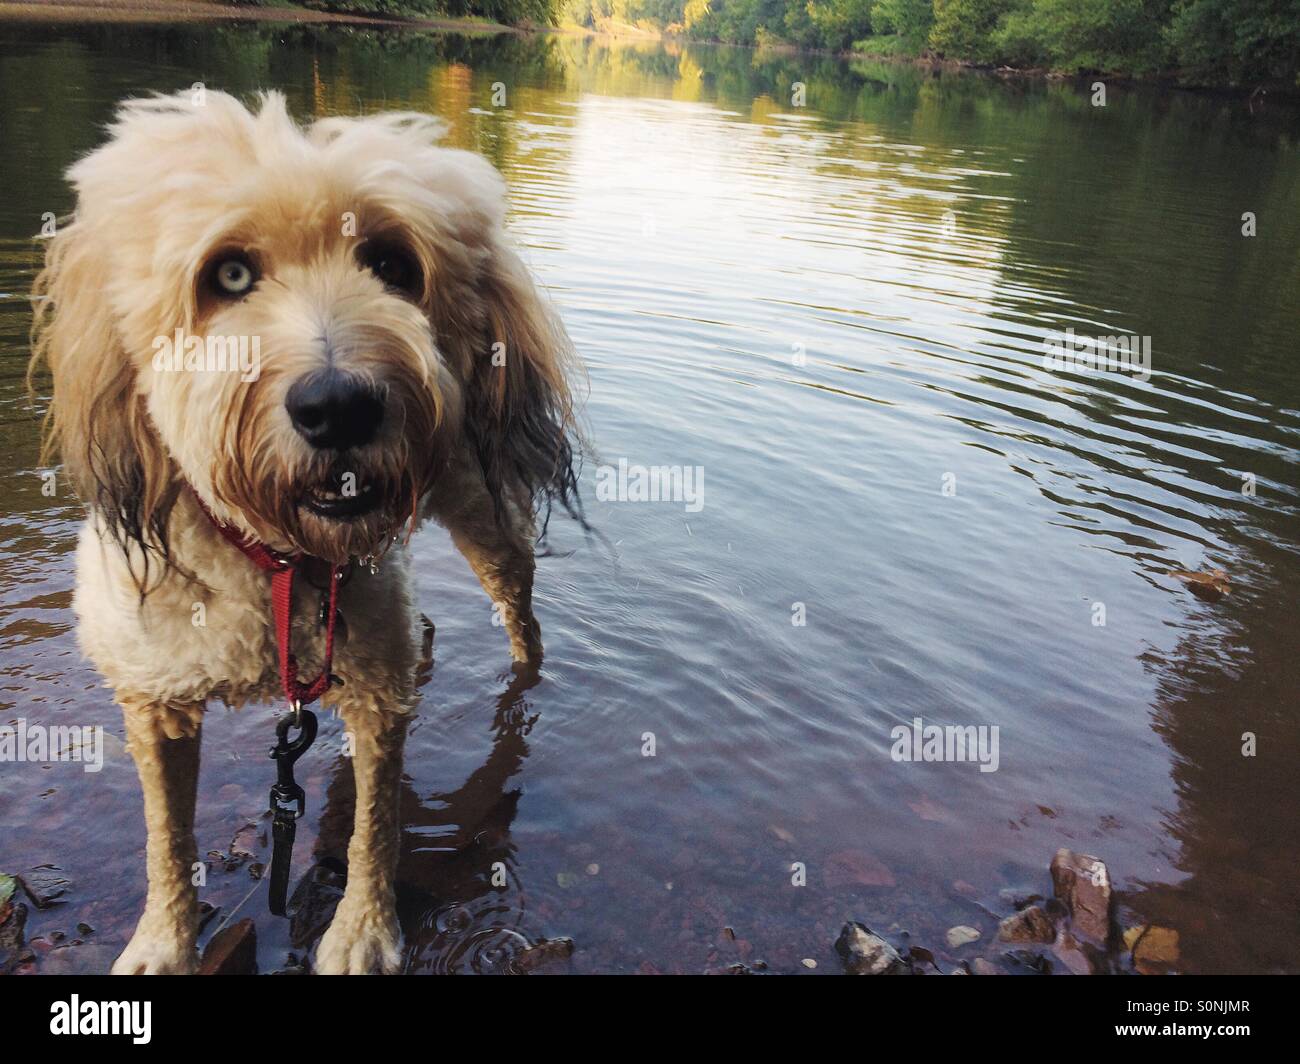 Fluffy mutt standing in river Stock Photo